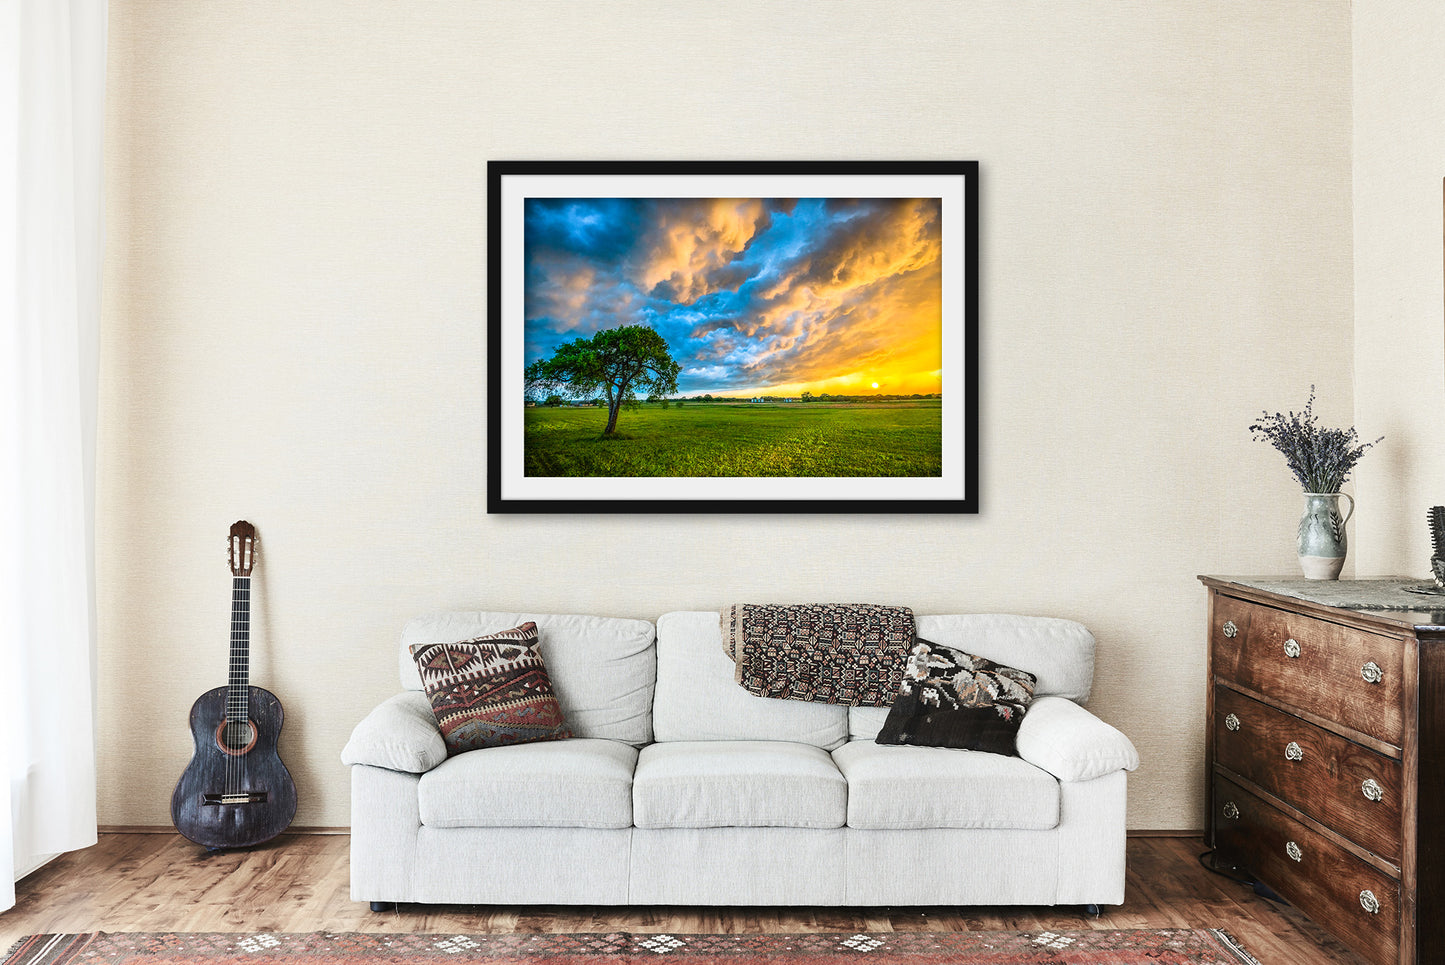 Framed and Matted Print - Picture of Colorful Storm Sky Over Lone Tree at Sunset on Spring Evening in Texas Landscape Wall Art Western Decor